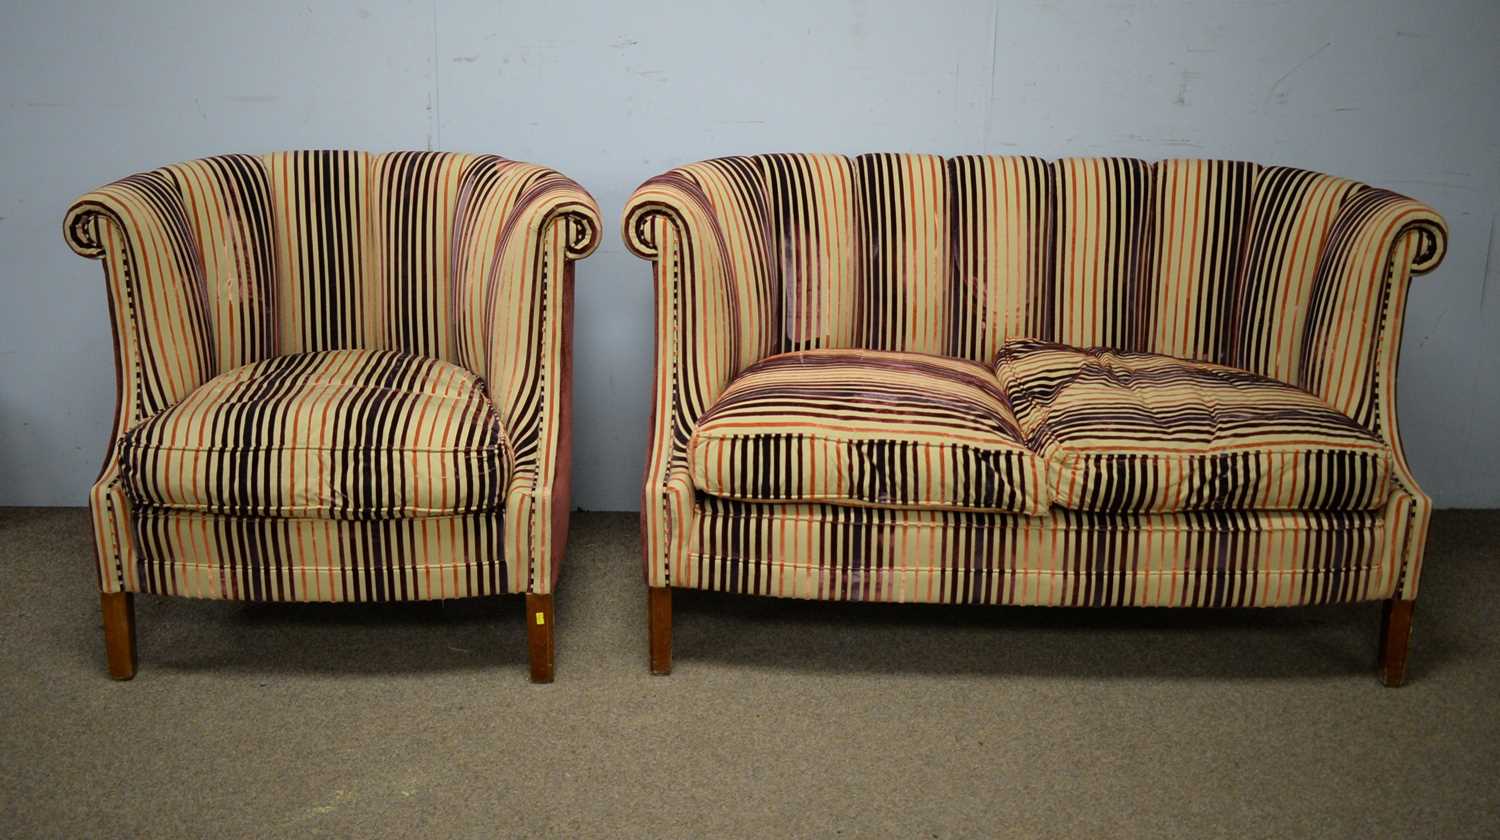 20th Century two piece suite